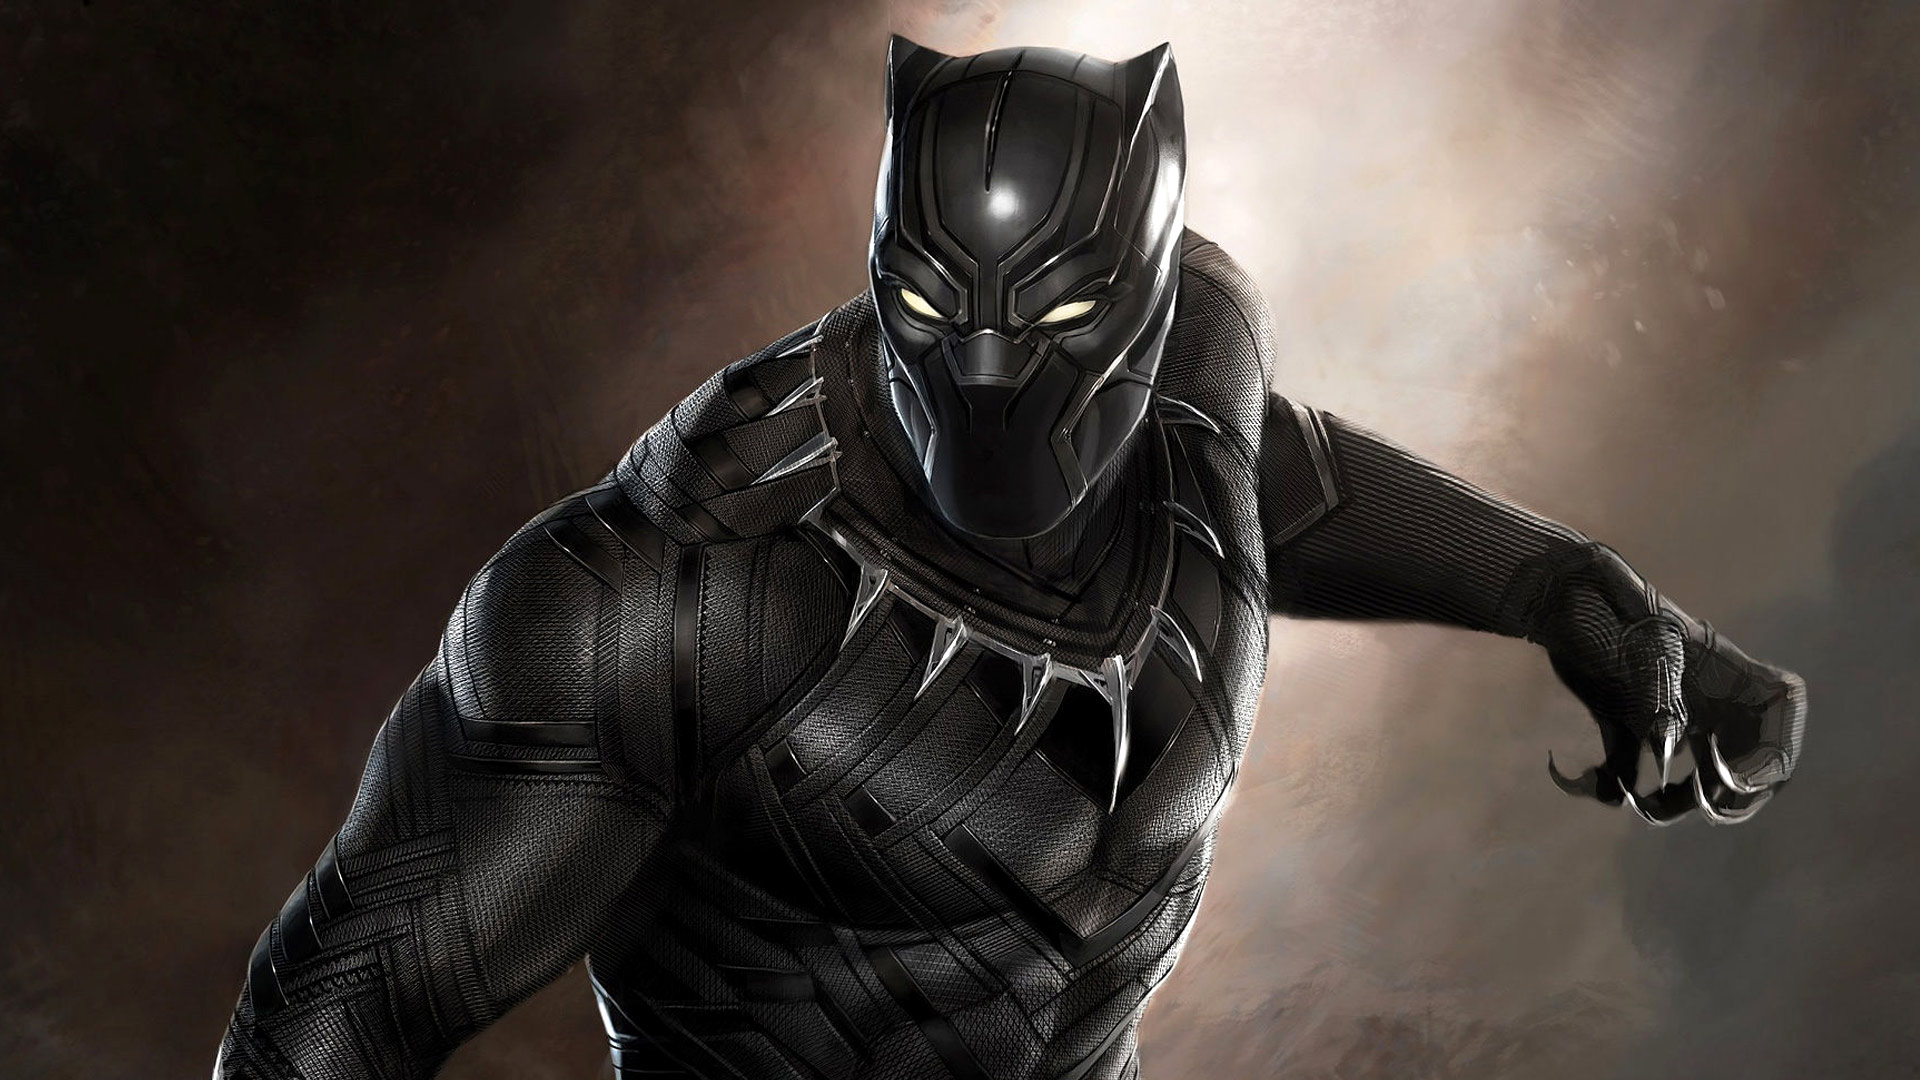 Download Black Panther Wallpaper For iOS